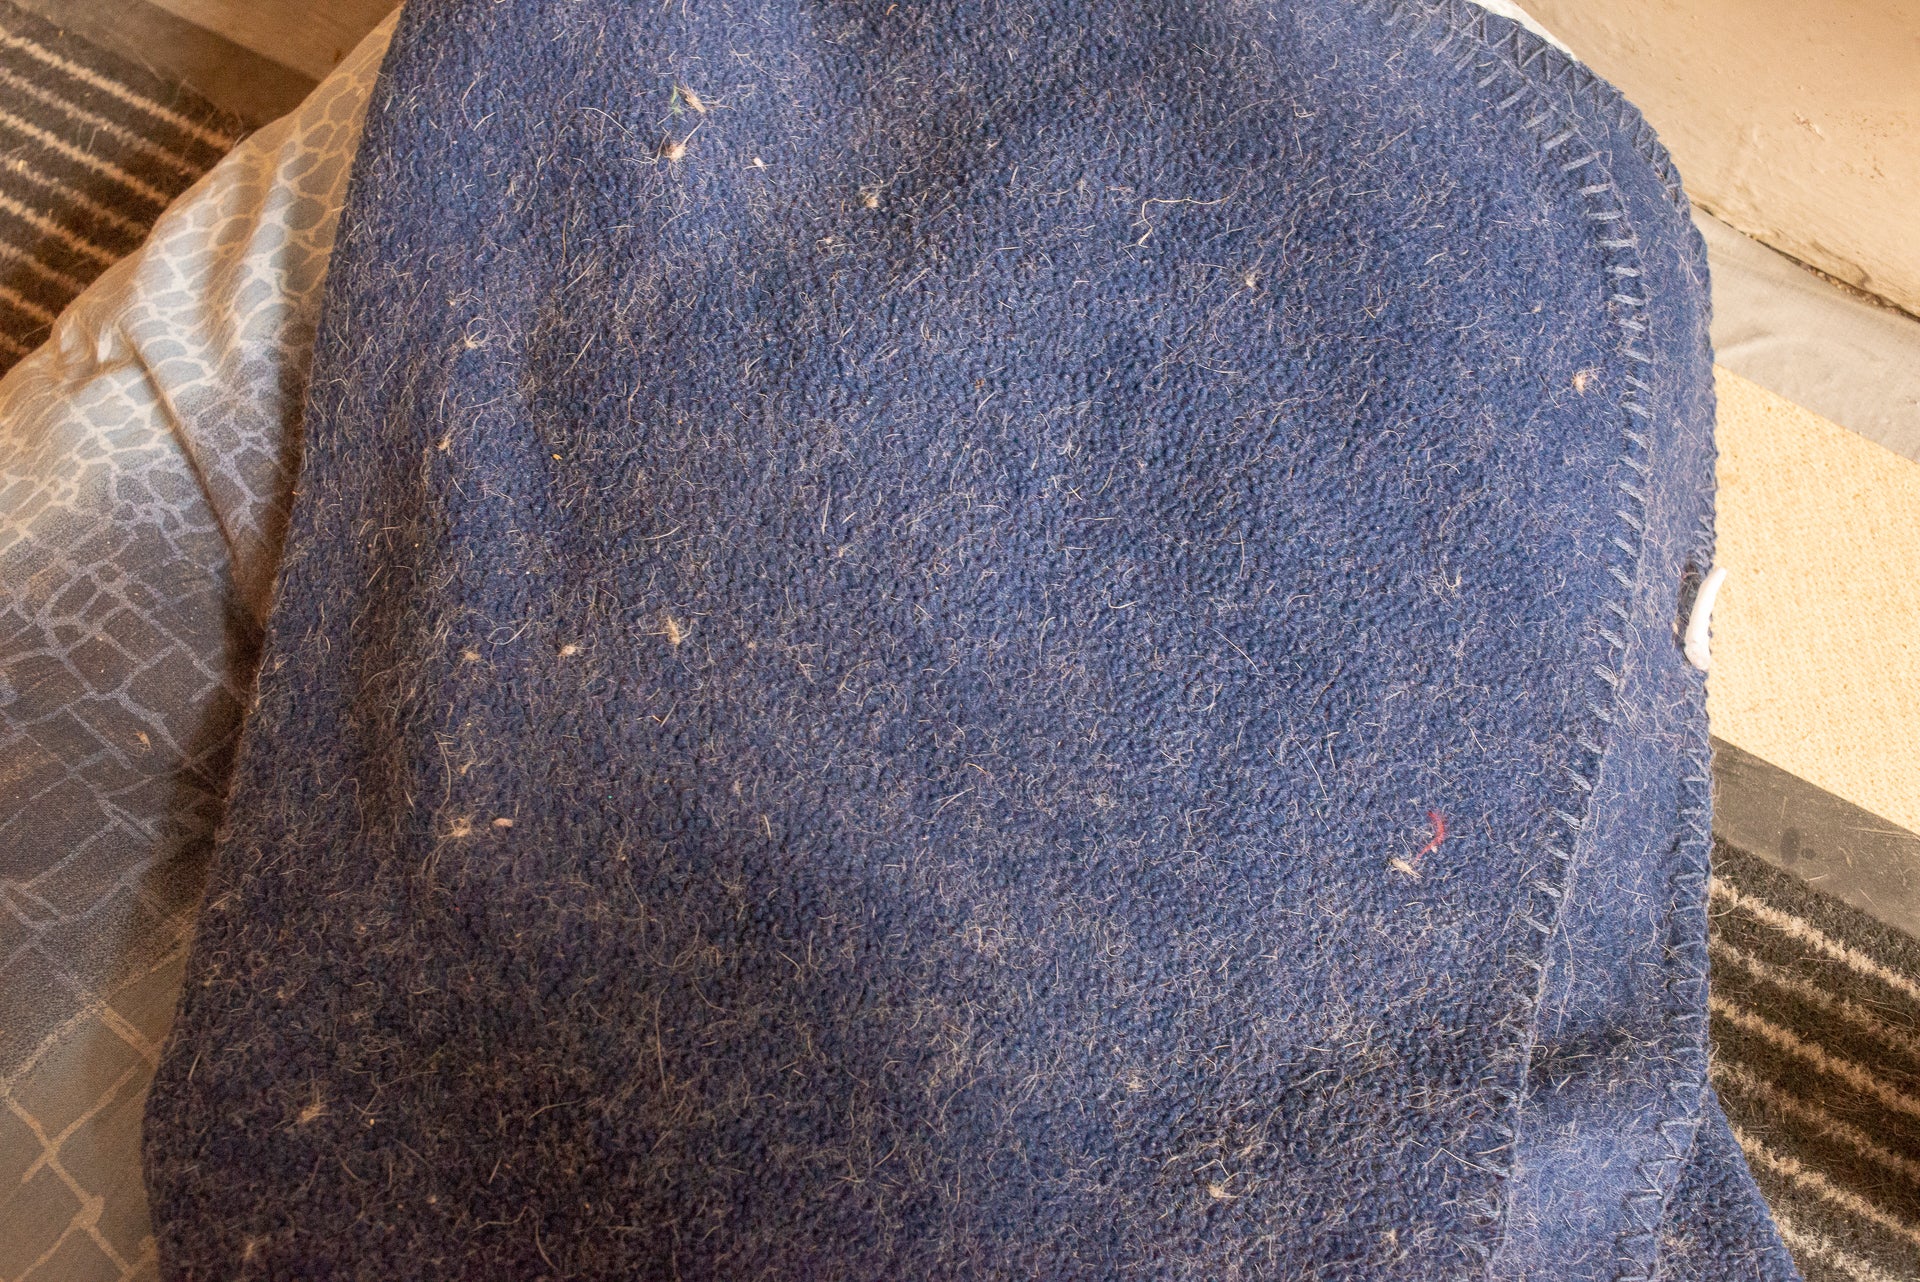 Carpet covered with pet hair and debris.